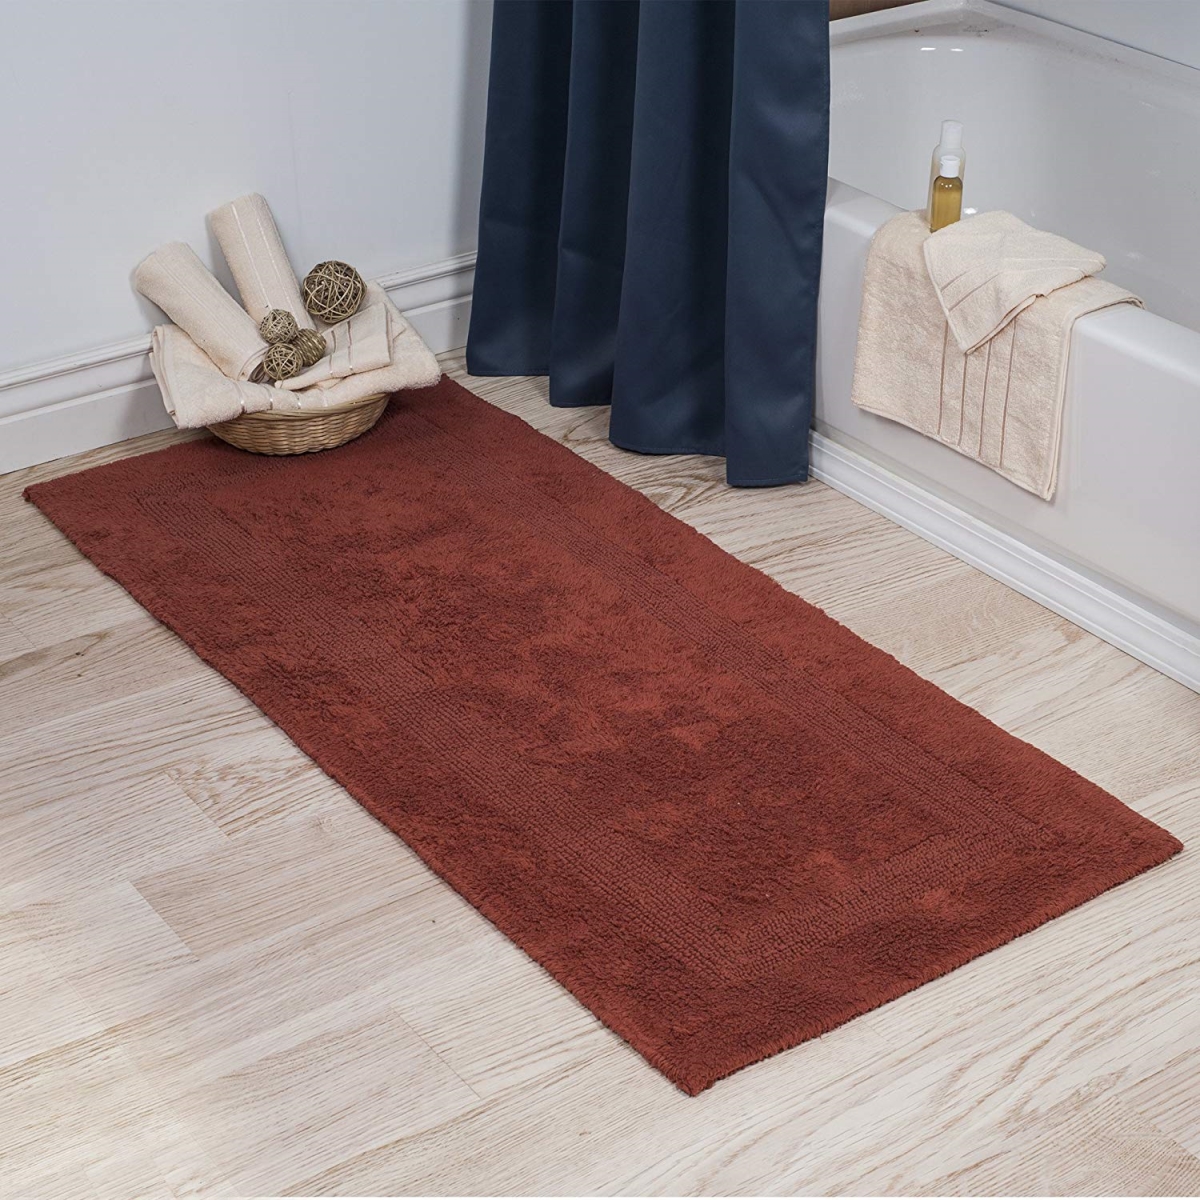 Picture of Bedford Home 67A-01622 100 Percent Cotton Reversible Long Bath Rug - Brick - 24 x 60 in.